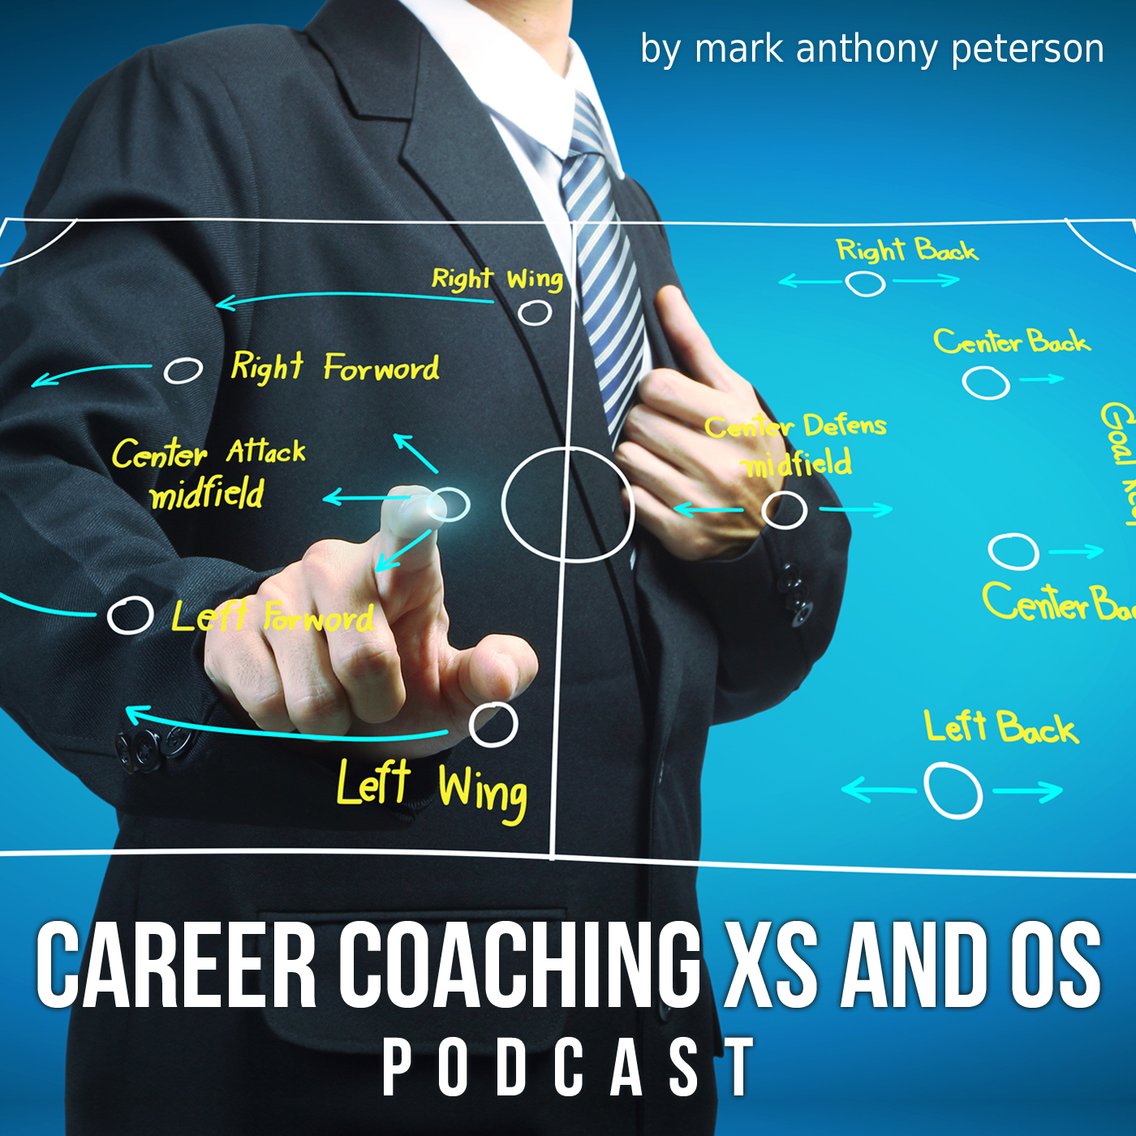 Career Coaching Xs and Os - Cover Image